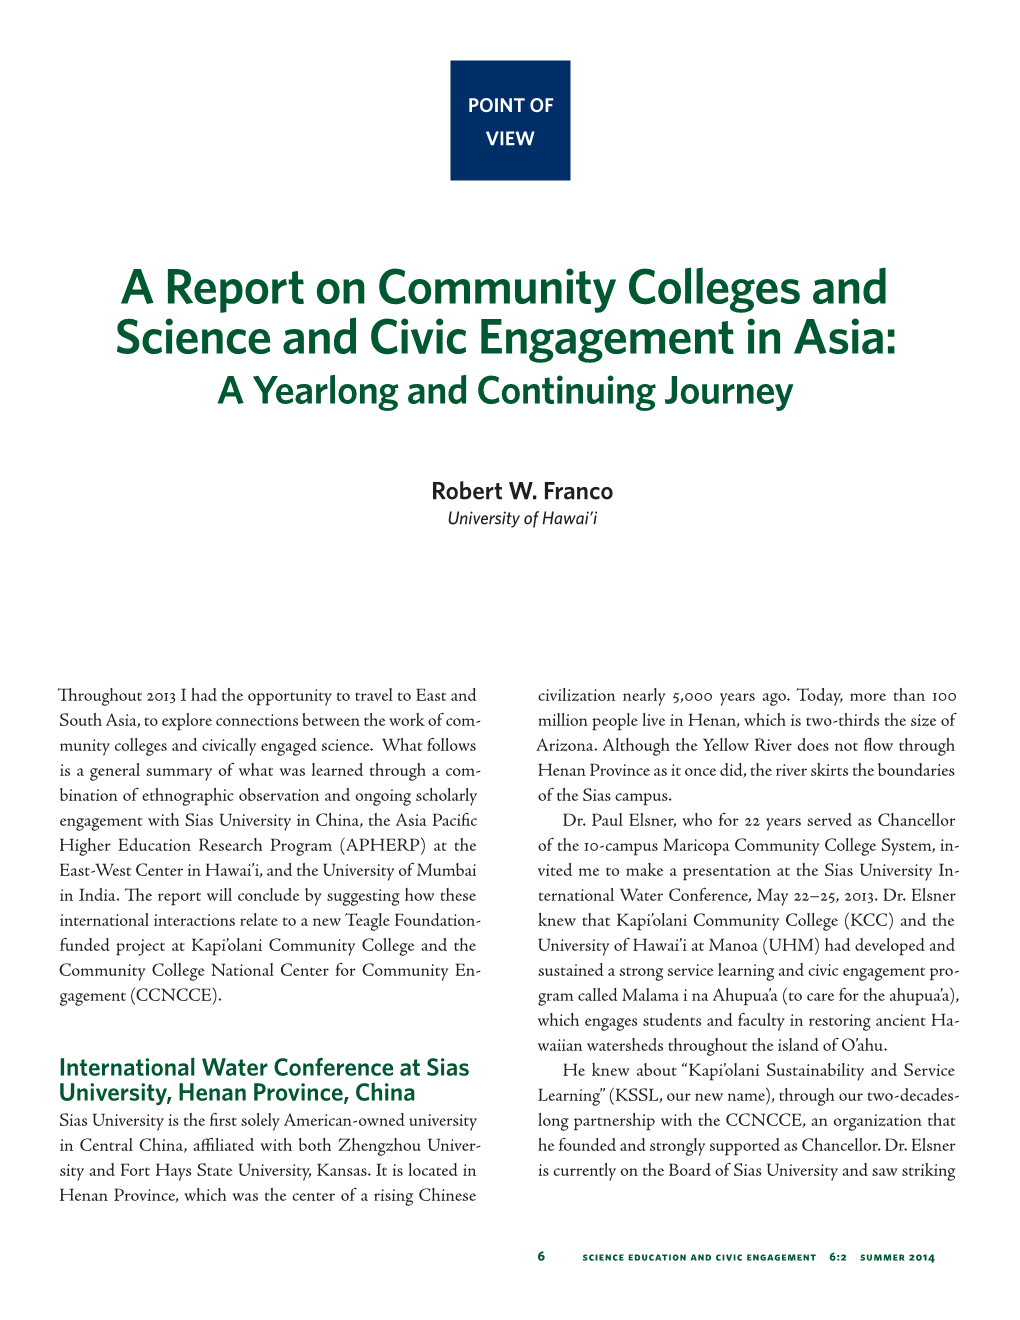 A Report on Community Colleges and Science and Civic Engagement in Asia: a Yearlong and Continuing Journey